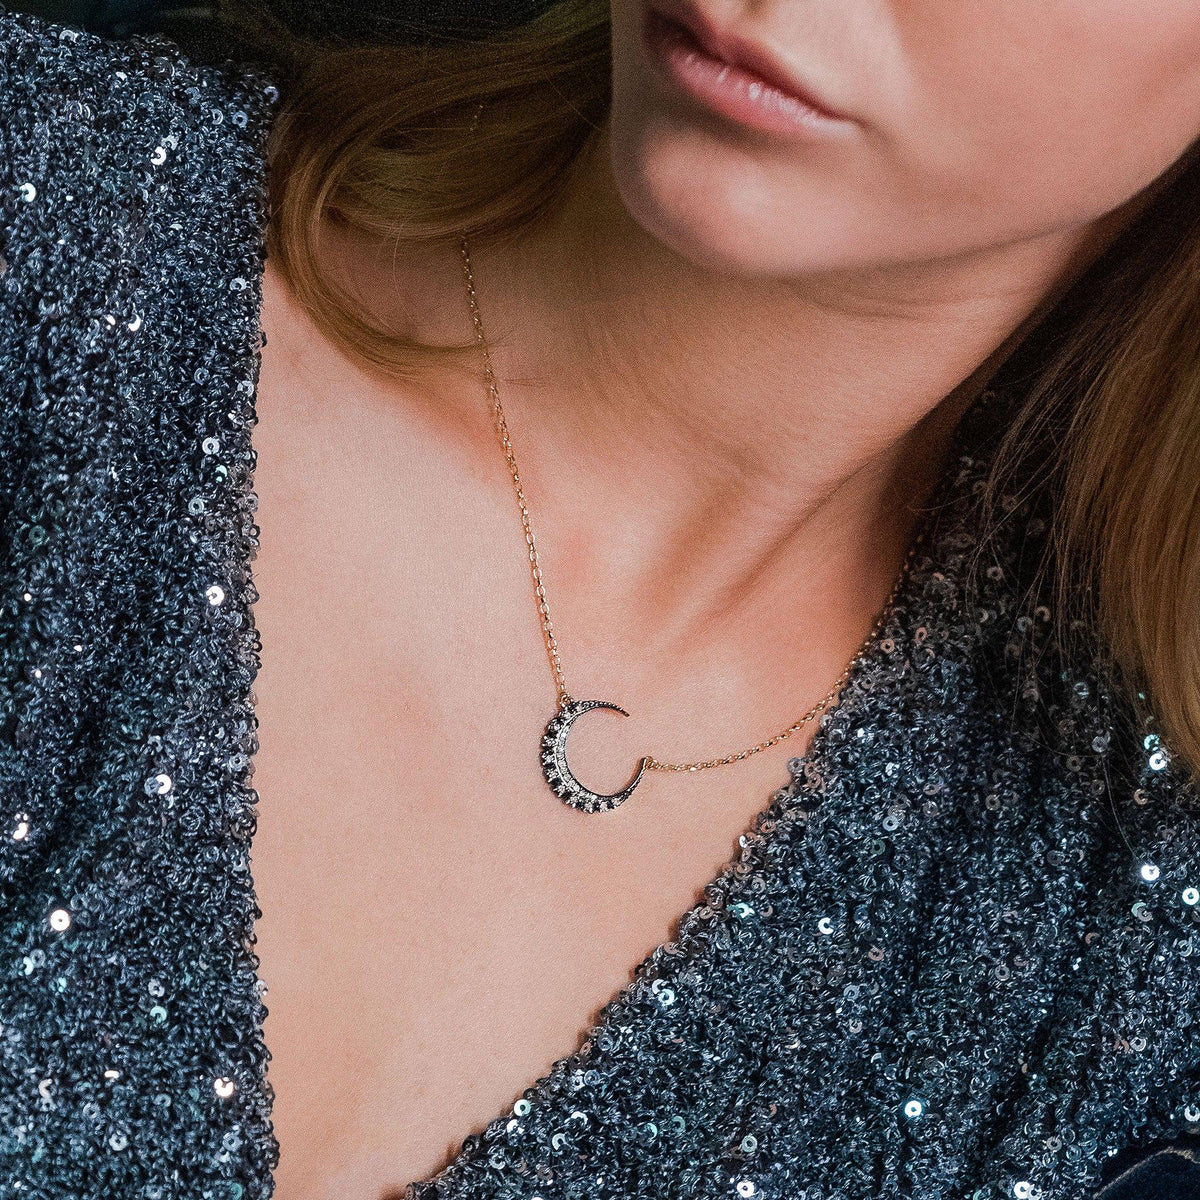 crescent-necklace-sqaure_1200x.jpg__PID:7a80a7f1-49bf-436c-bba1-2f0246659777